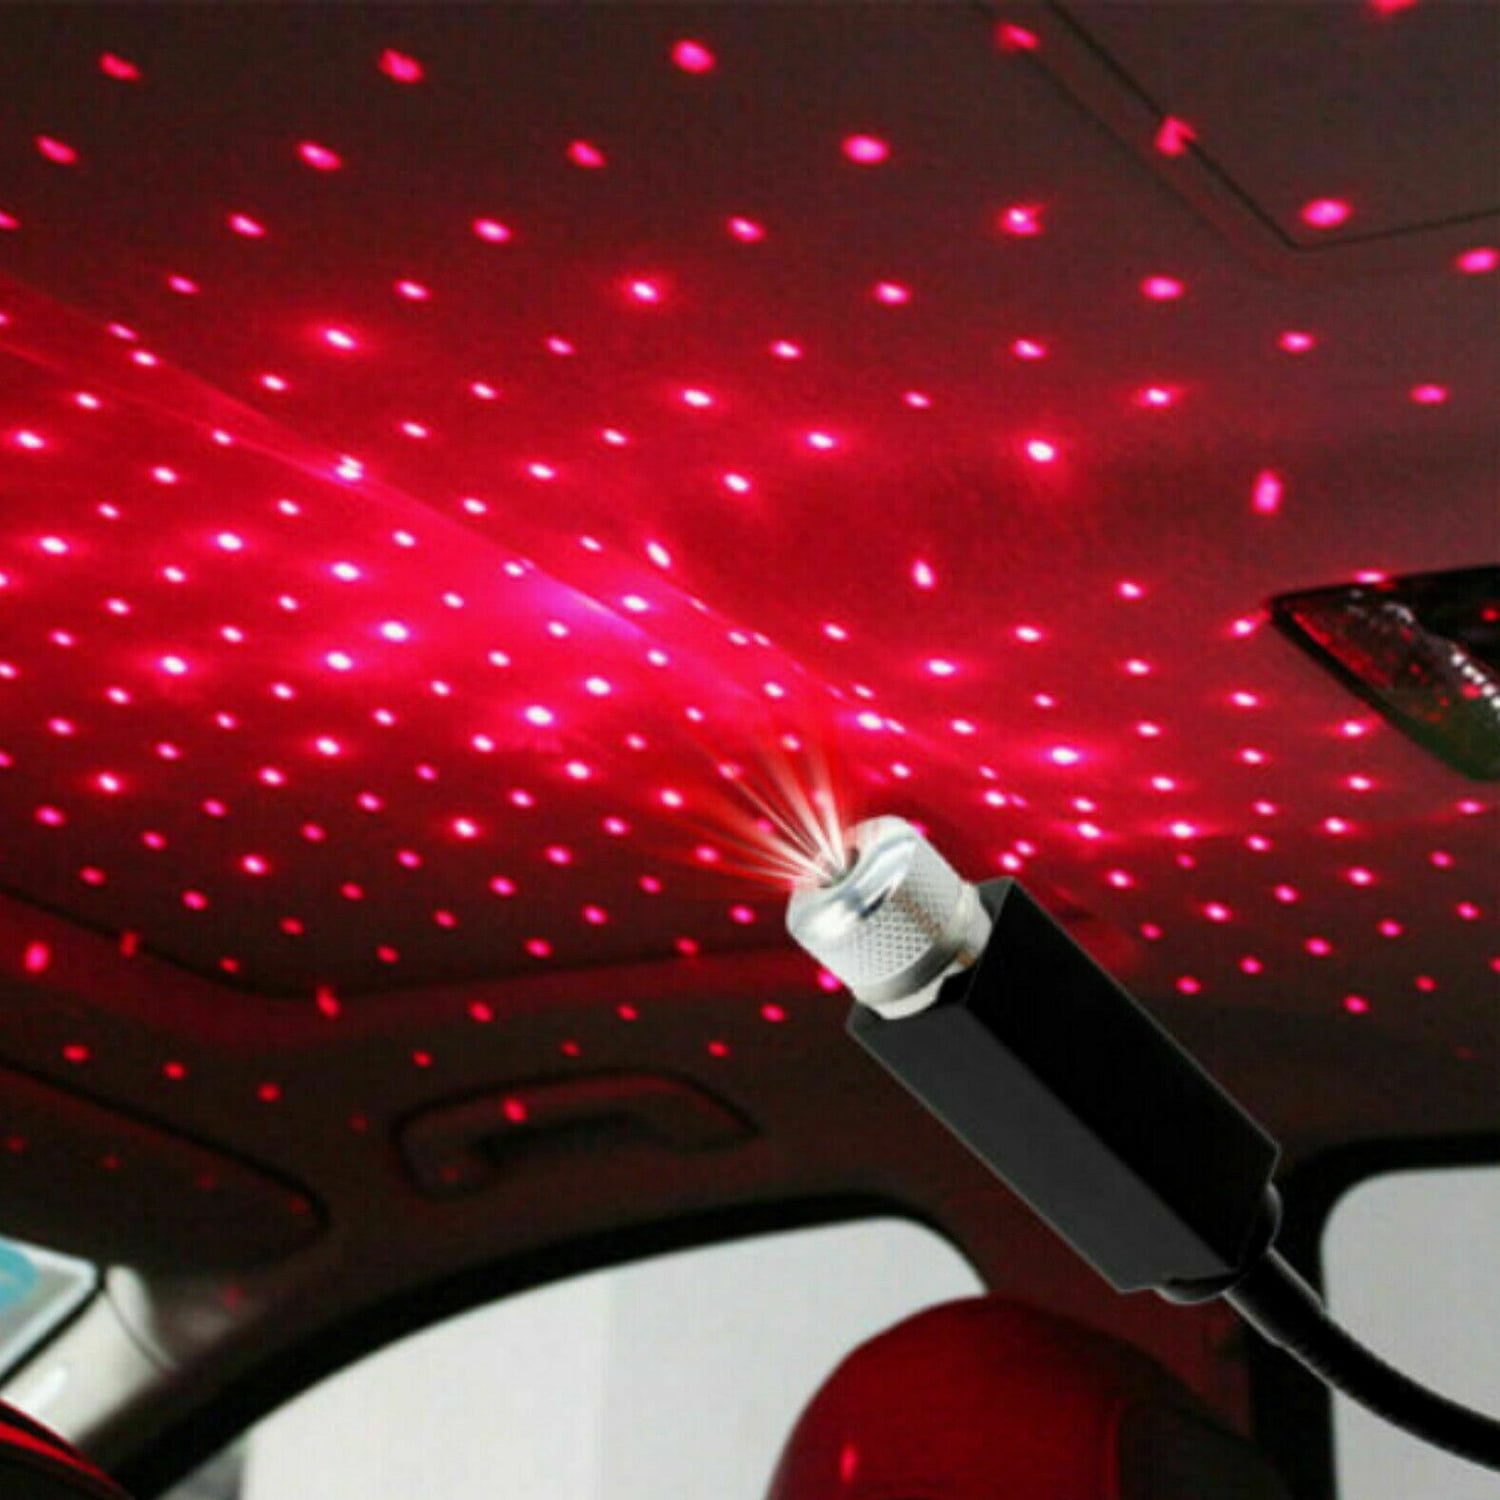 Red-Starry sky GBAuto USB Car interior lights LED decorative armrest box car roof full star projection laser,Romantic Auto Roof Star led,The interiors Multiple Modes Lights for car/Home/Party 